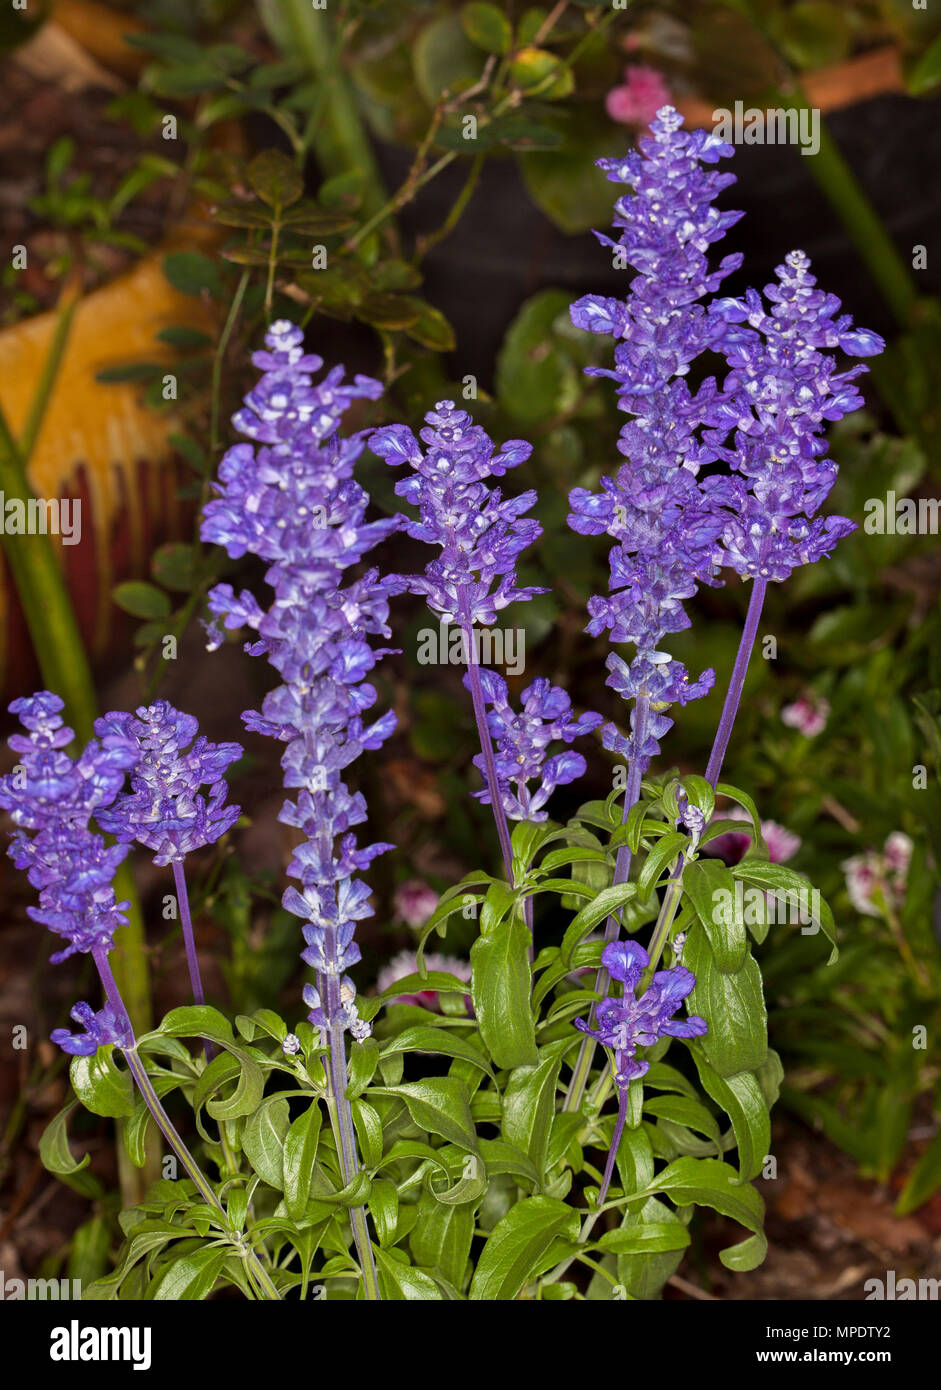 Spikes of deep blue / purple flowers and green leaves of Salvia farinacea 'Sallyfun', a perennial plant on dark background Stock Photo